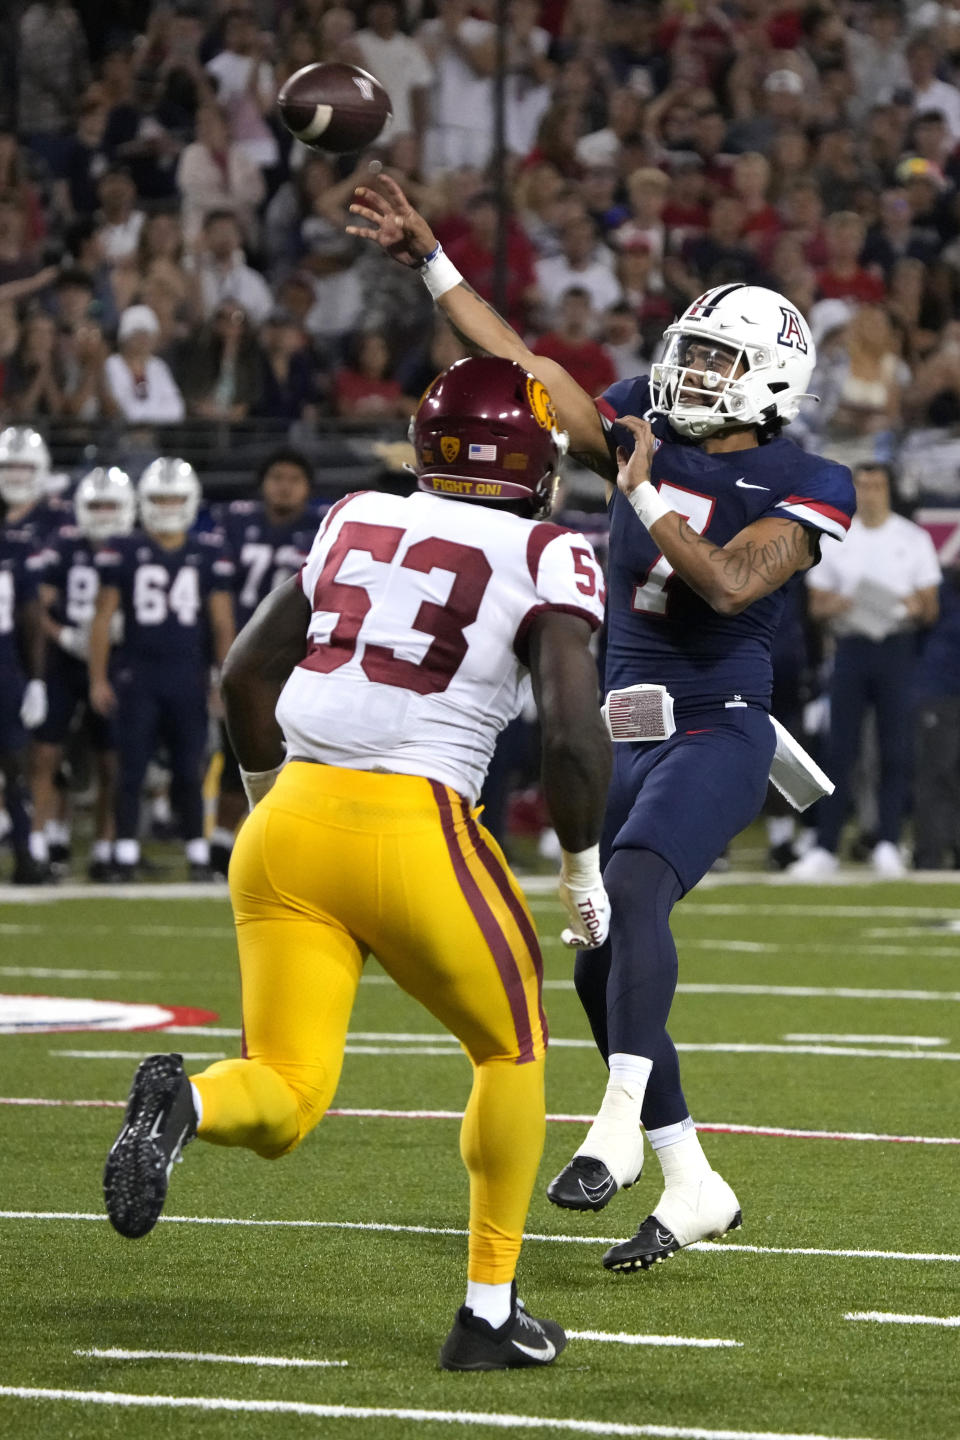 Arizona quarterback Jayden de Laura throws down field while being pressured by Southern California linebacker Shane Lee (53) in the second half during an NCAA college football game, Saturday, Oct. 29, 2022, in Tucson, Ariz. (AP Photo/Rick Scuteri)